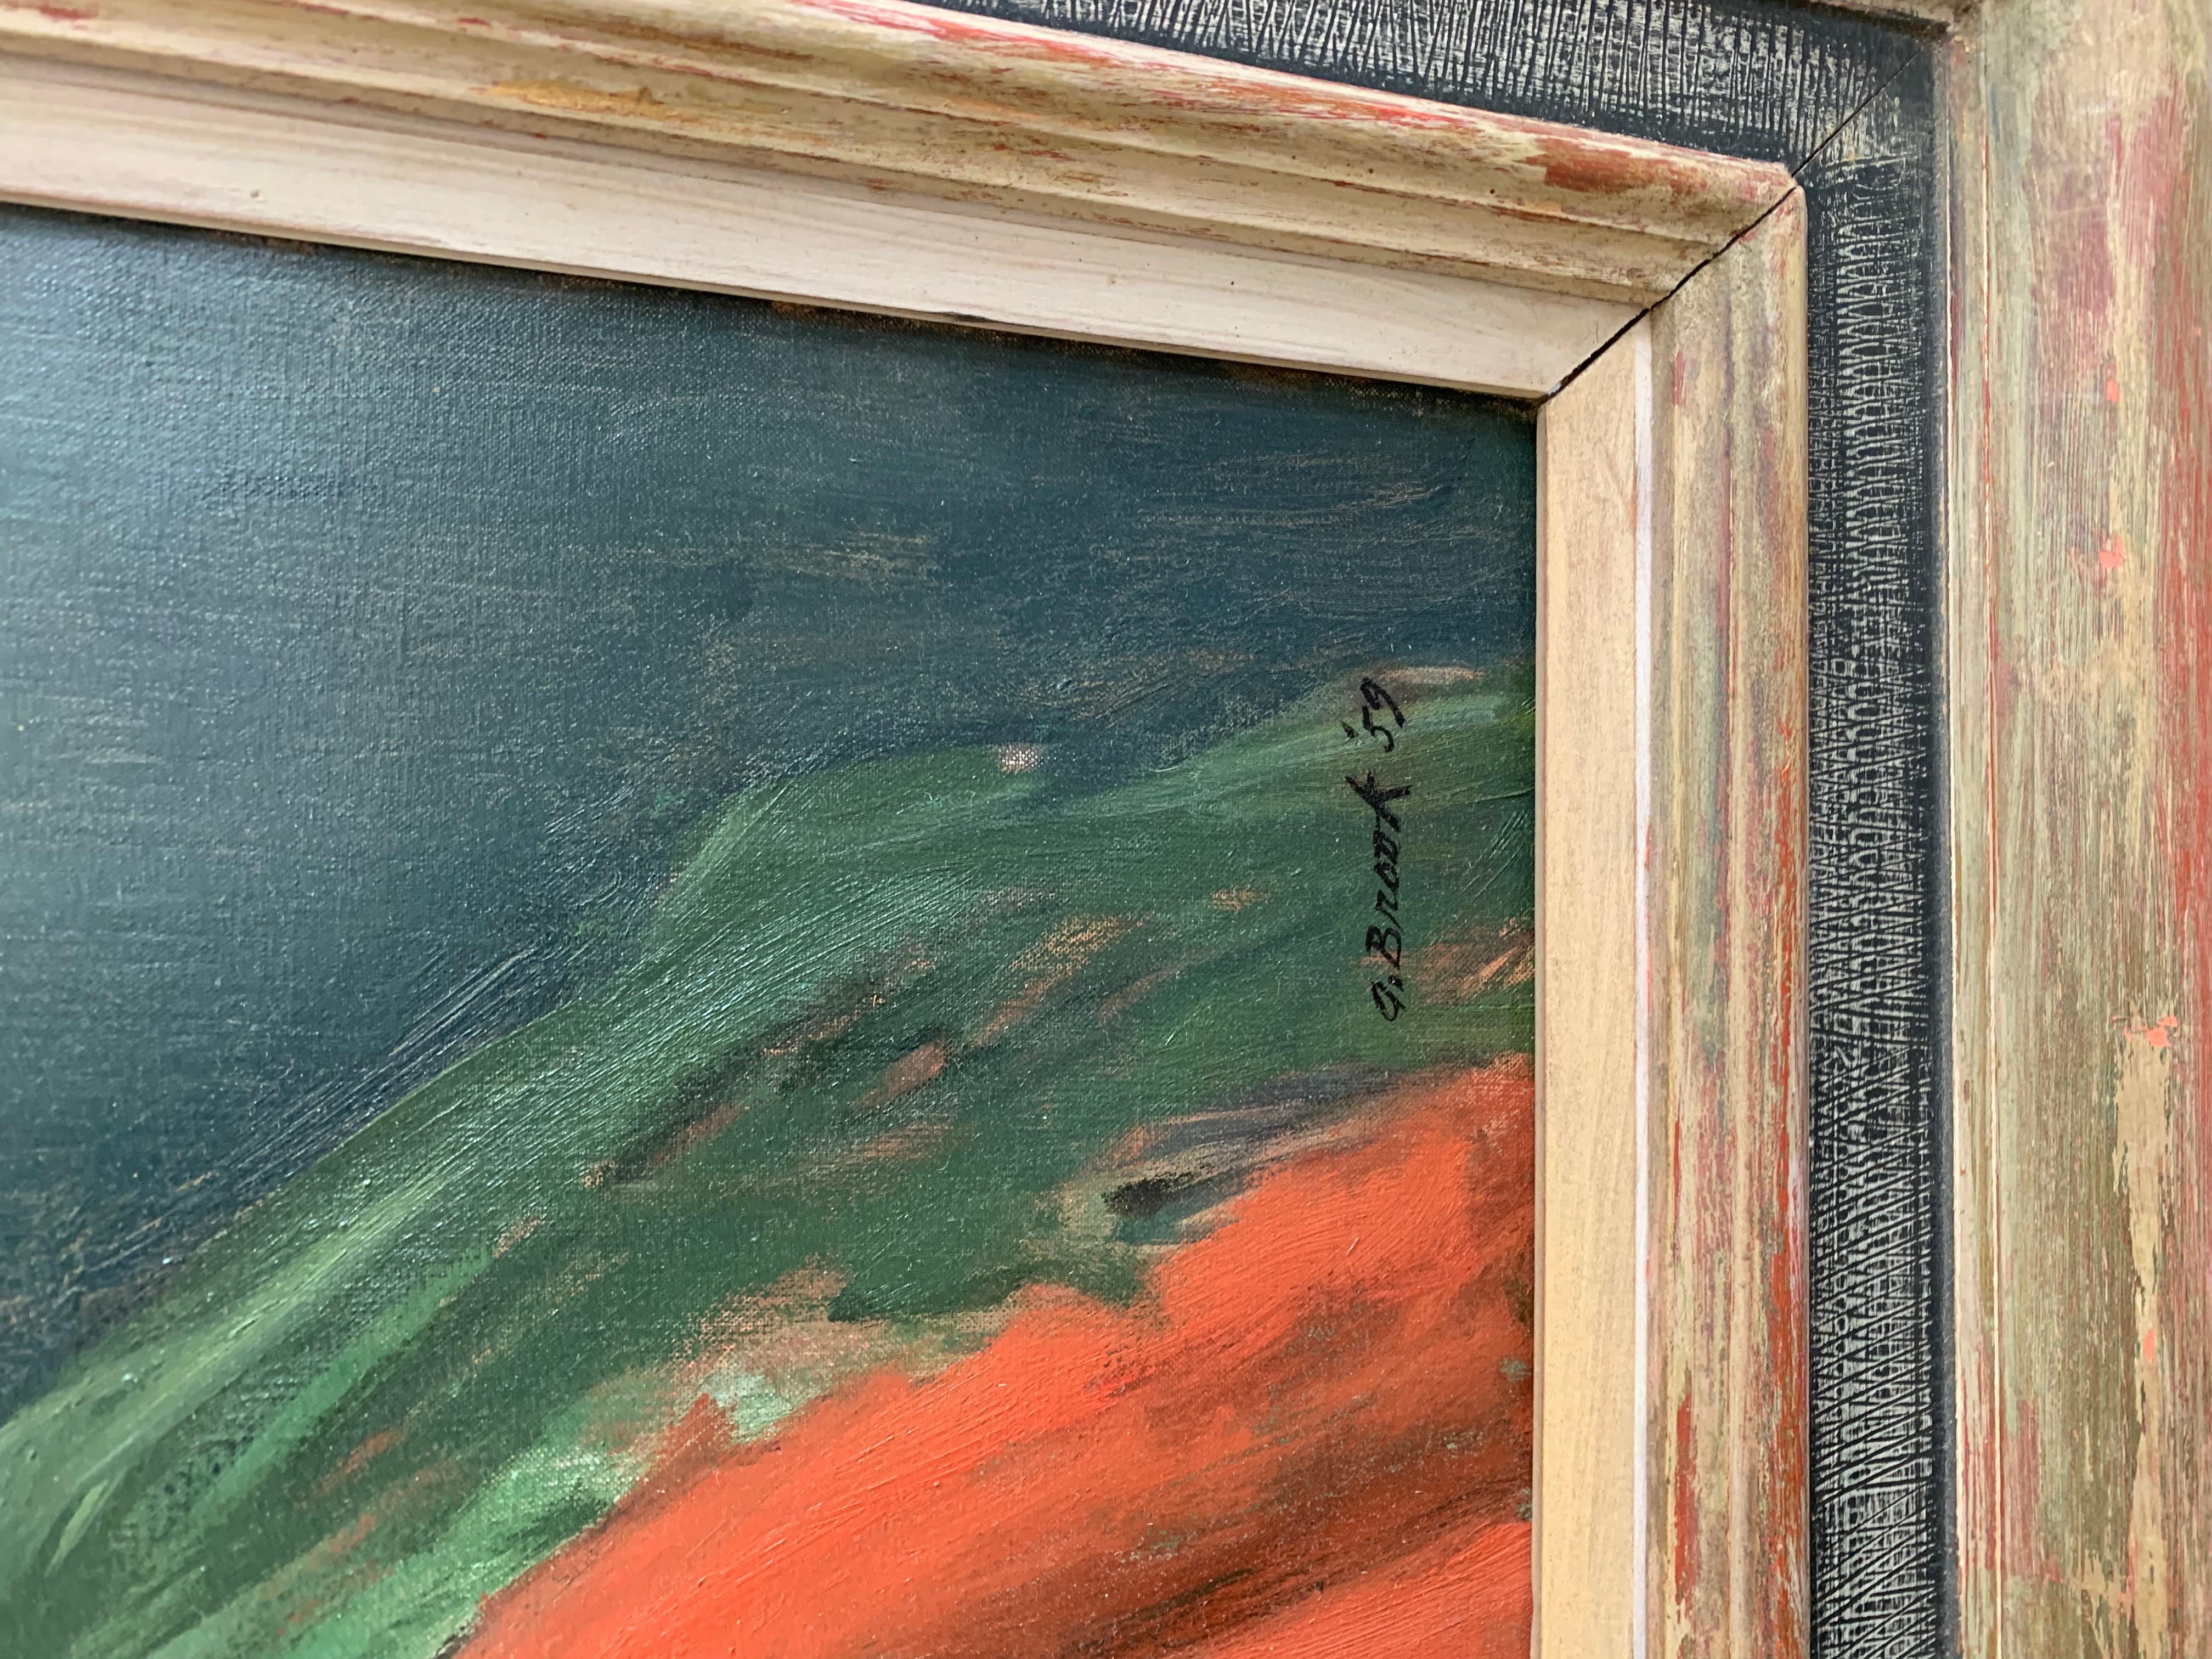 Signed lower right: 'A.Brook '59'.

Painted in Sag Harbor, Long Island in 1959.  Adeline (Adaline) Glasheen was a writer. She was a friend of the artist and worked in literary circles with Thornton Wilder, with whom she published a book of letters